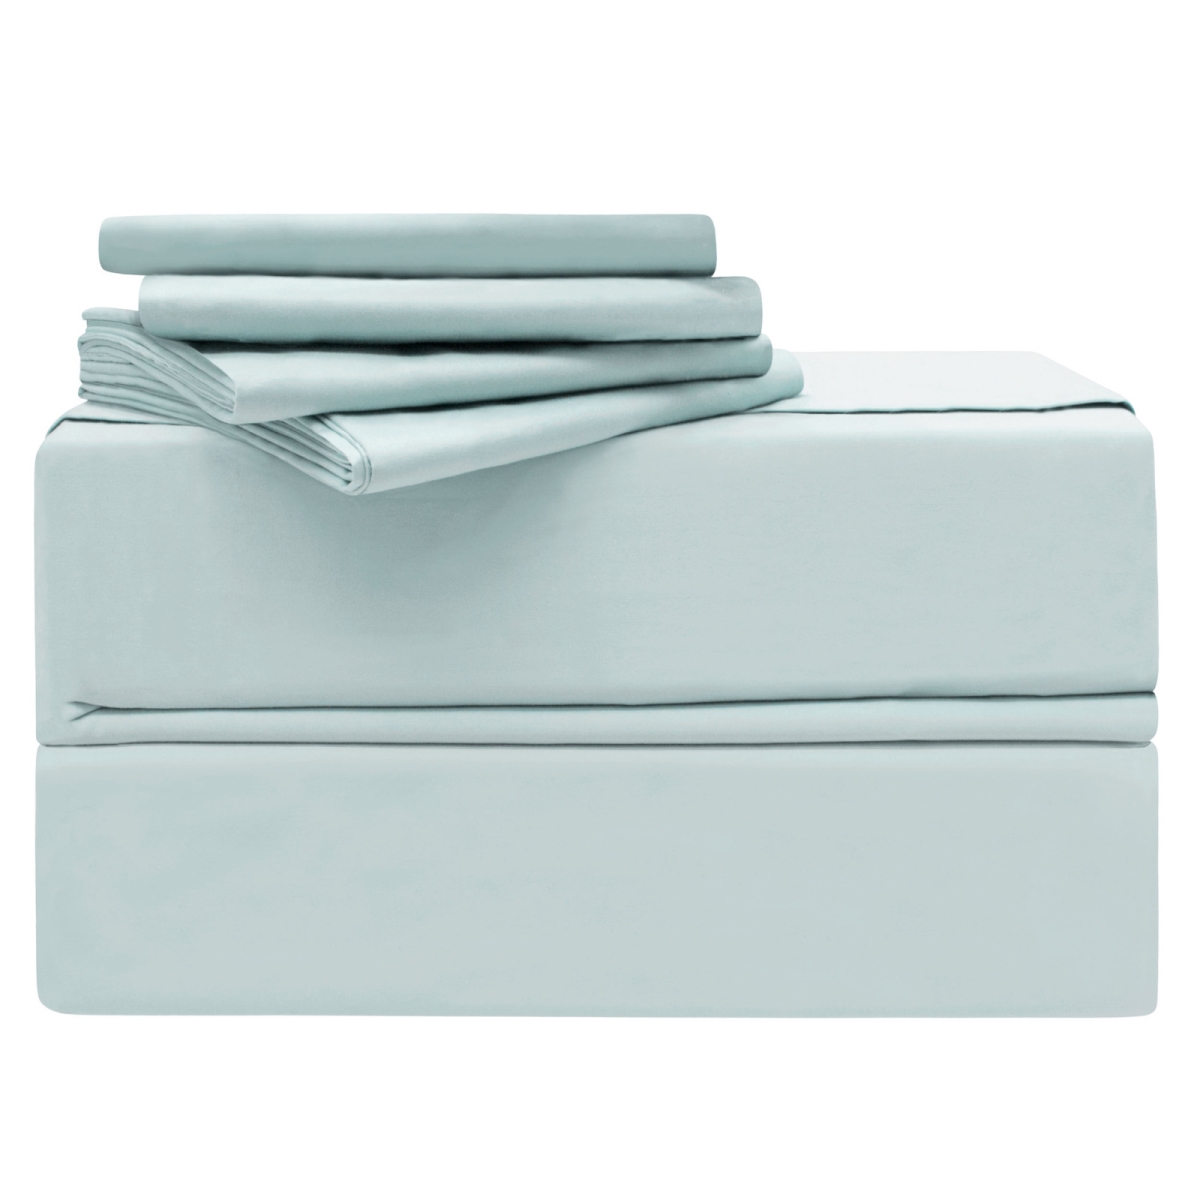 Yms008202 Luxury 620 Thread Count 100 Percent Cotton Sheet Set, Spa Blue - California King - 6 Piece